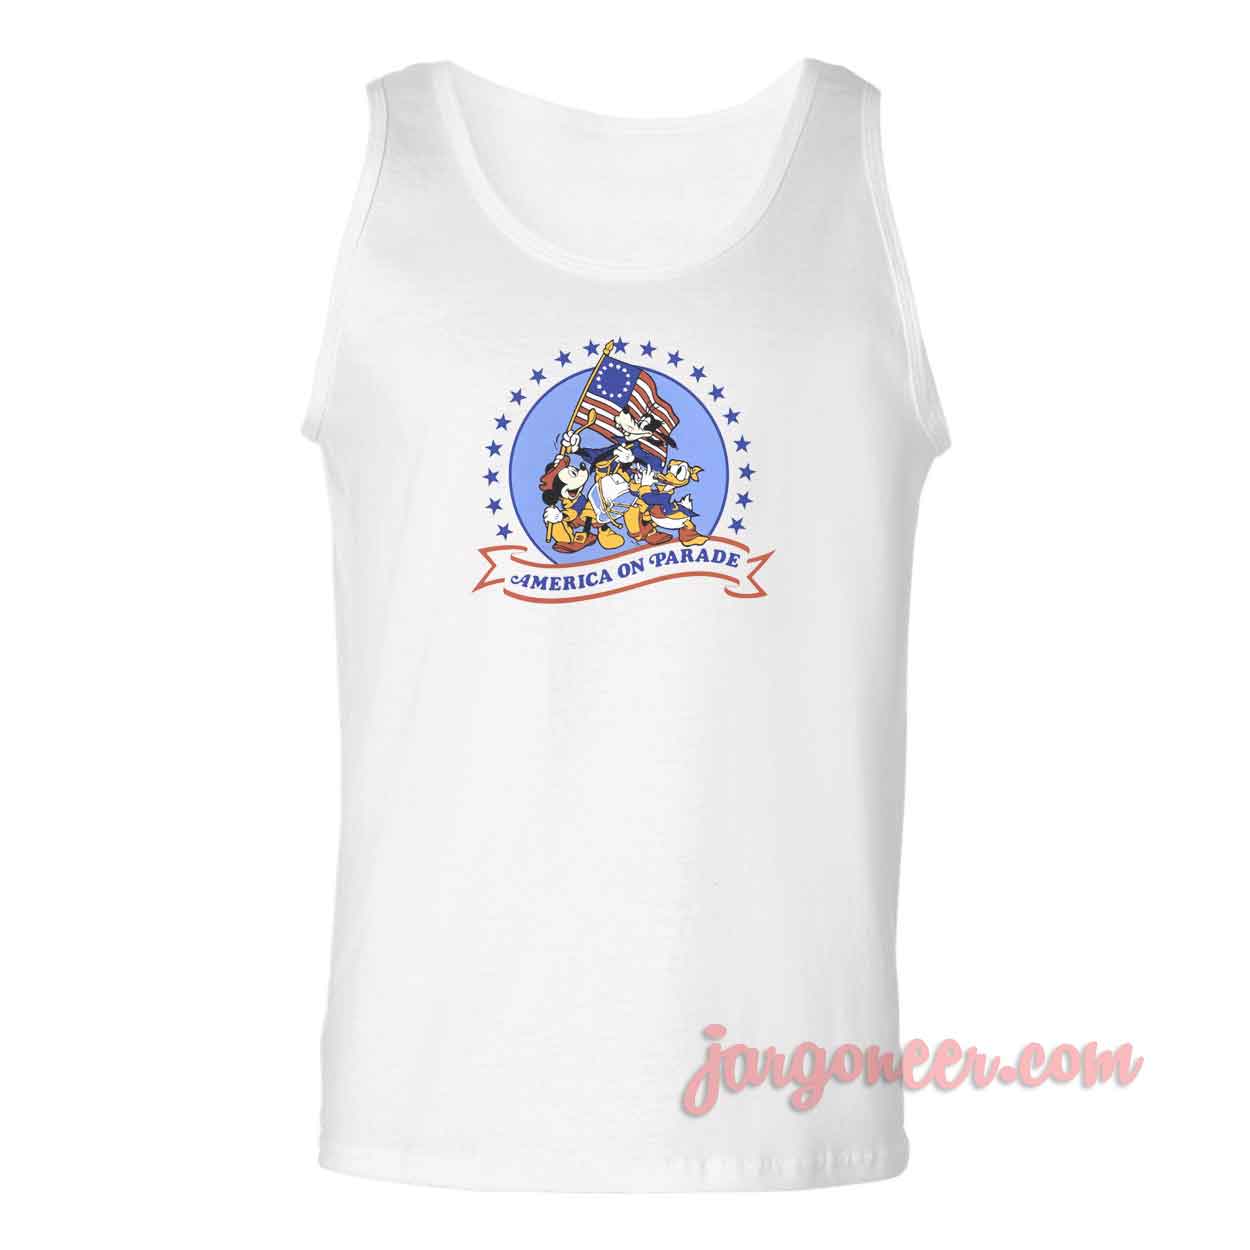 Mickey On America Parade - Shop Unique Graphic Cool Shirt Designs